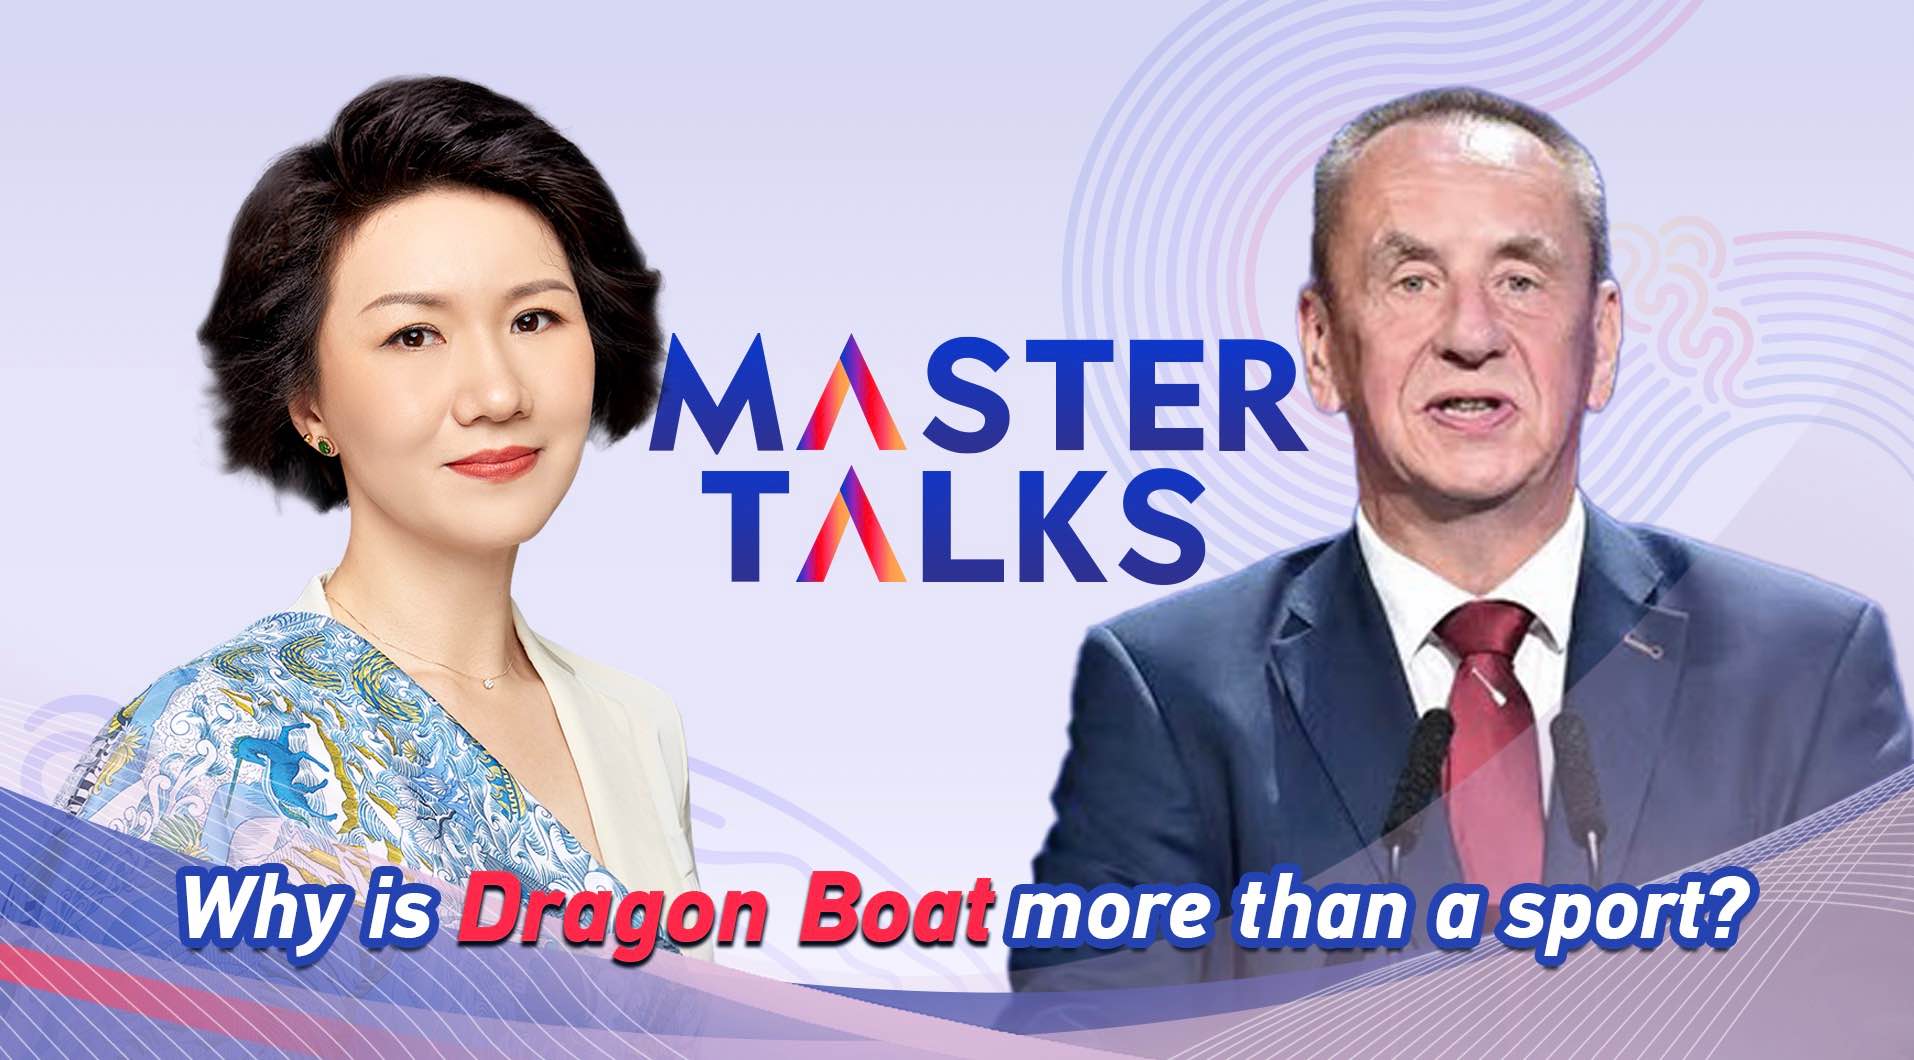 Master Talks: Why is Dragon Boat more than a sport?